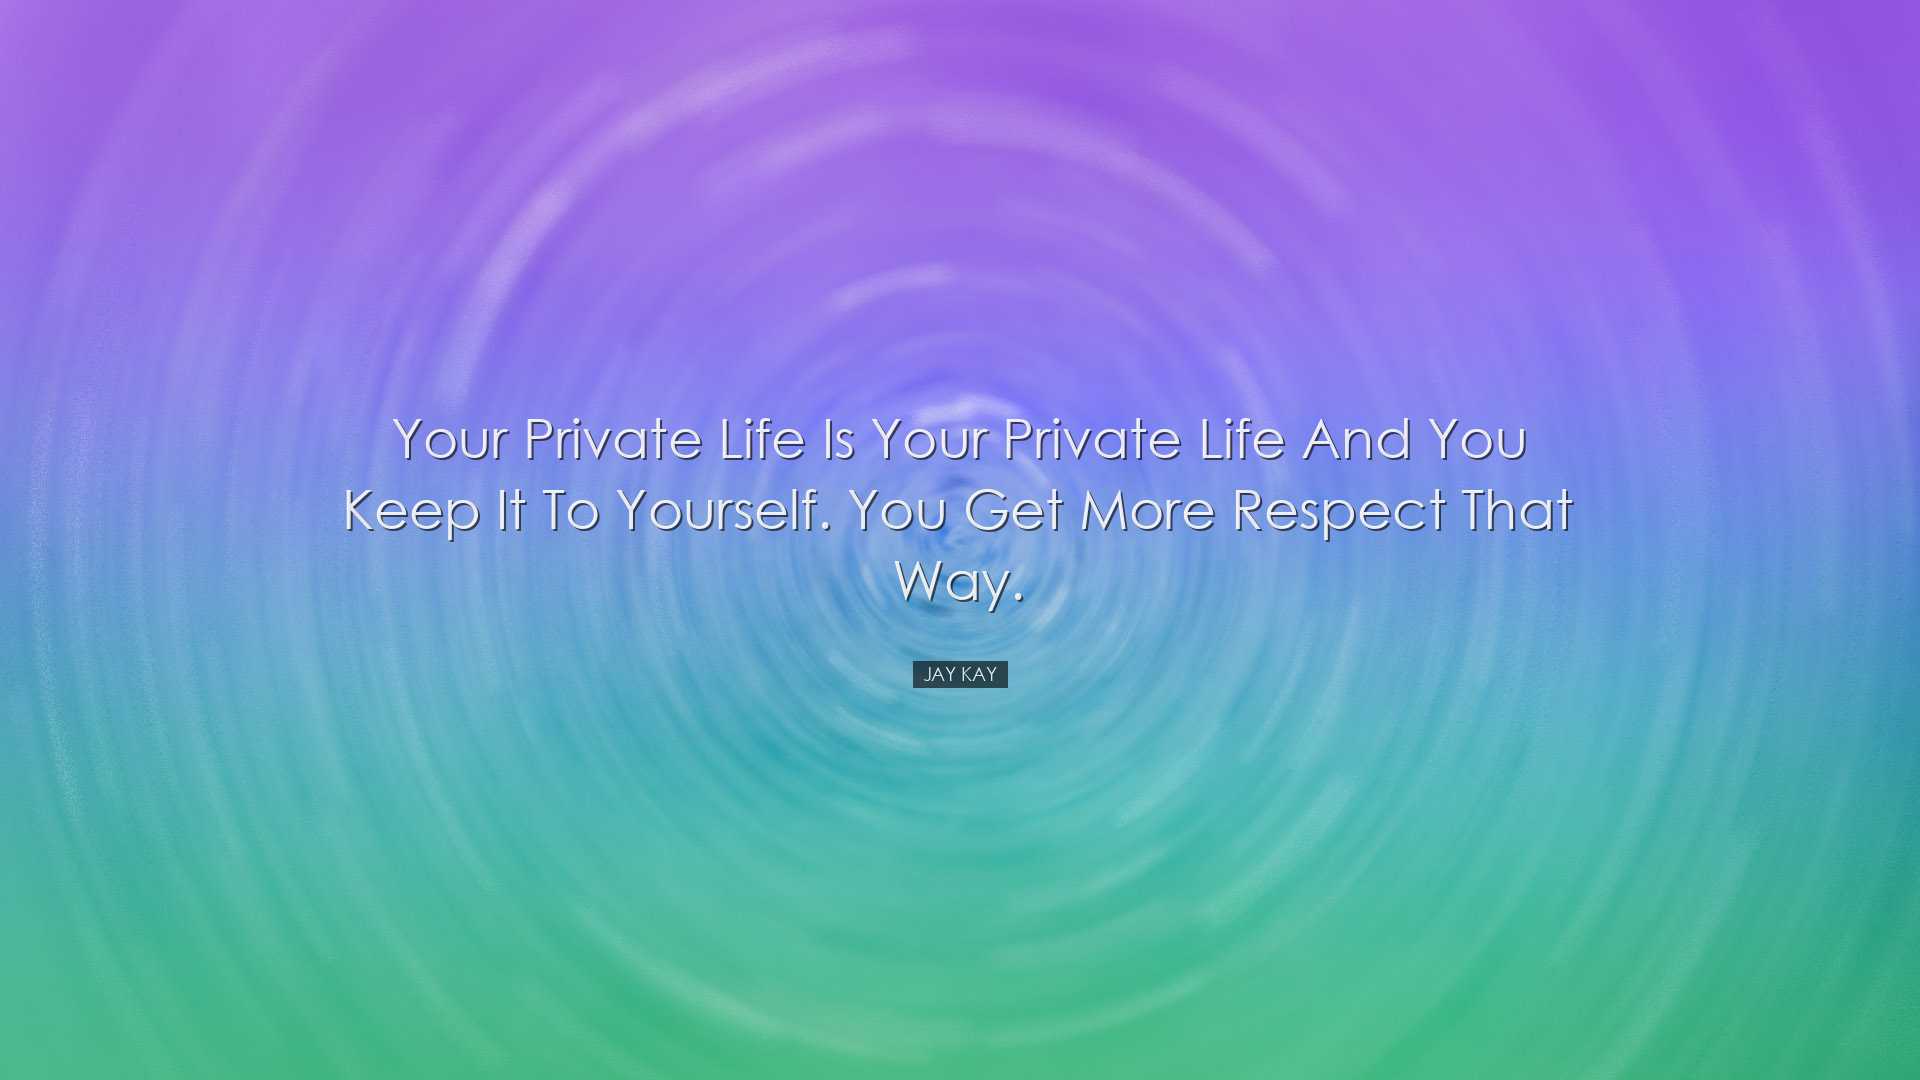 Your private life is your private life and you keep it to yourself